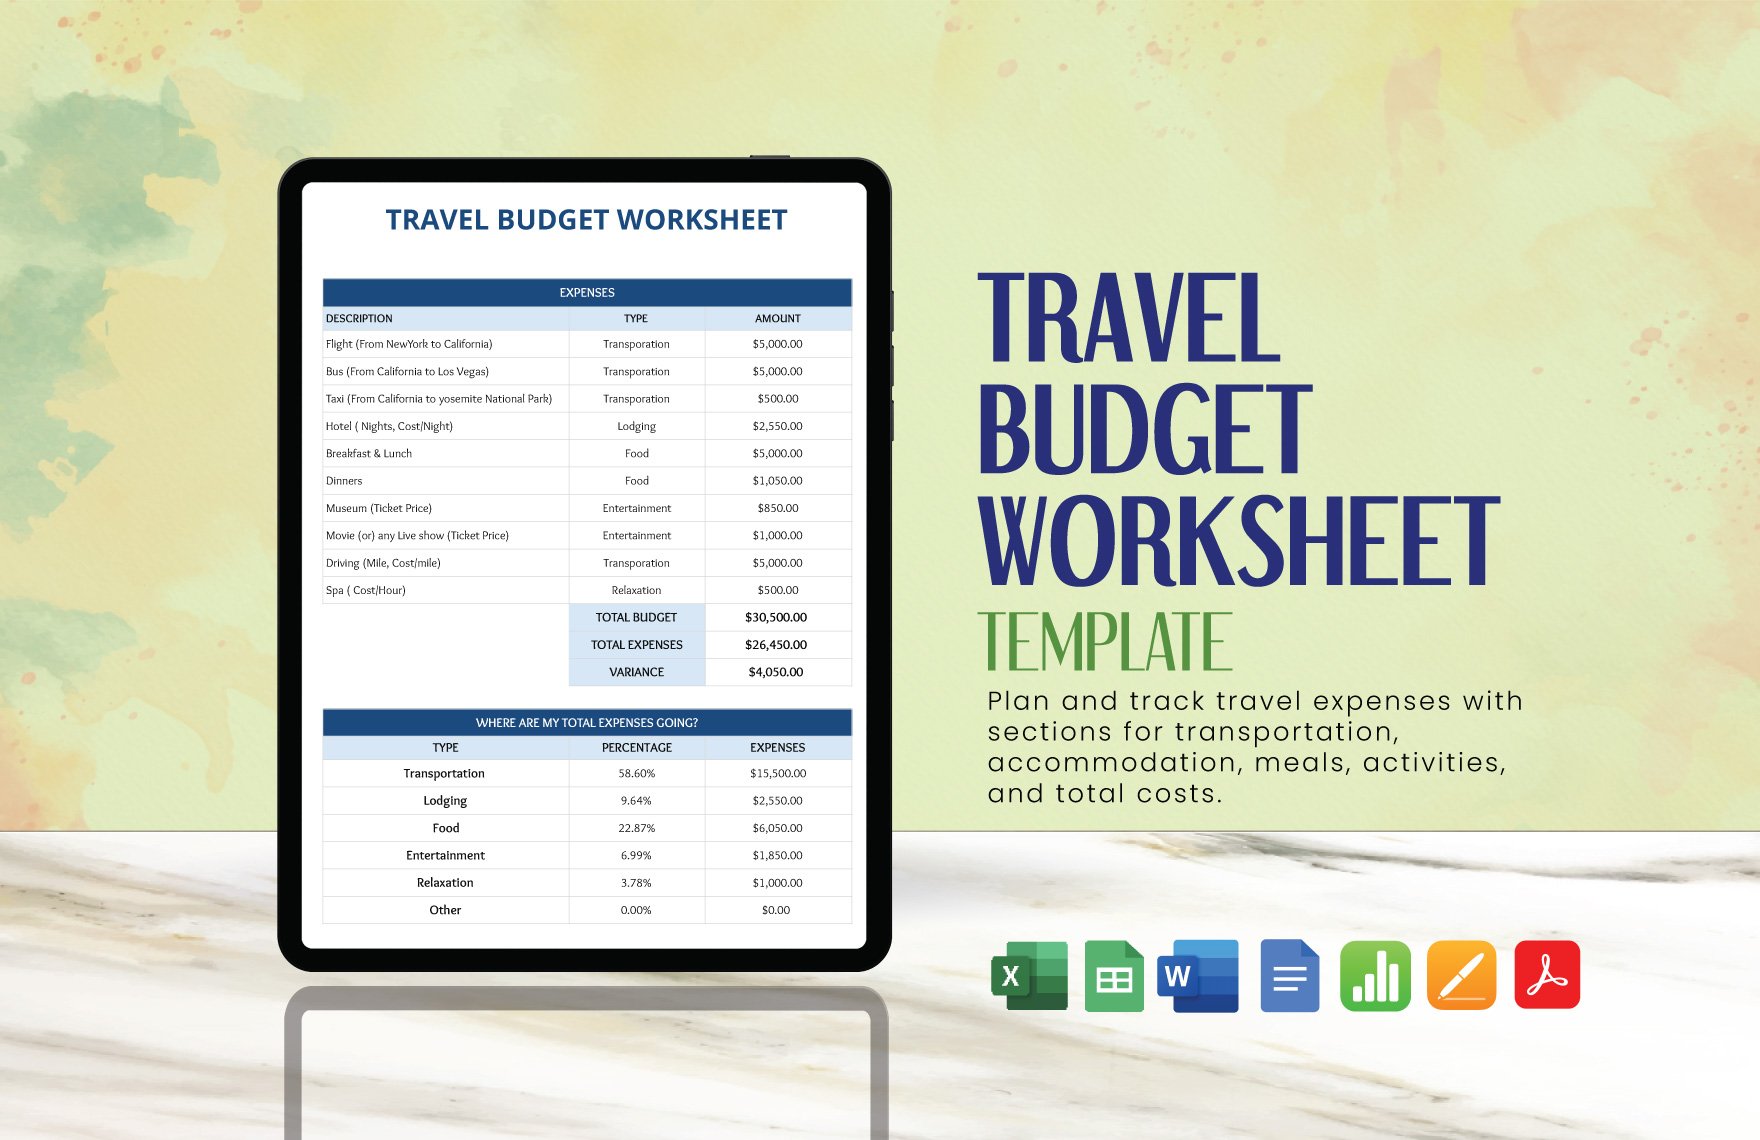 Travel Budget Worksheet Template in Word, Google Docs, Excel, PDF, Google Sheets, Apple Pages, Apple Numbers